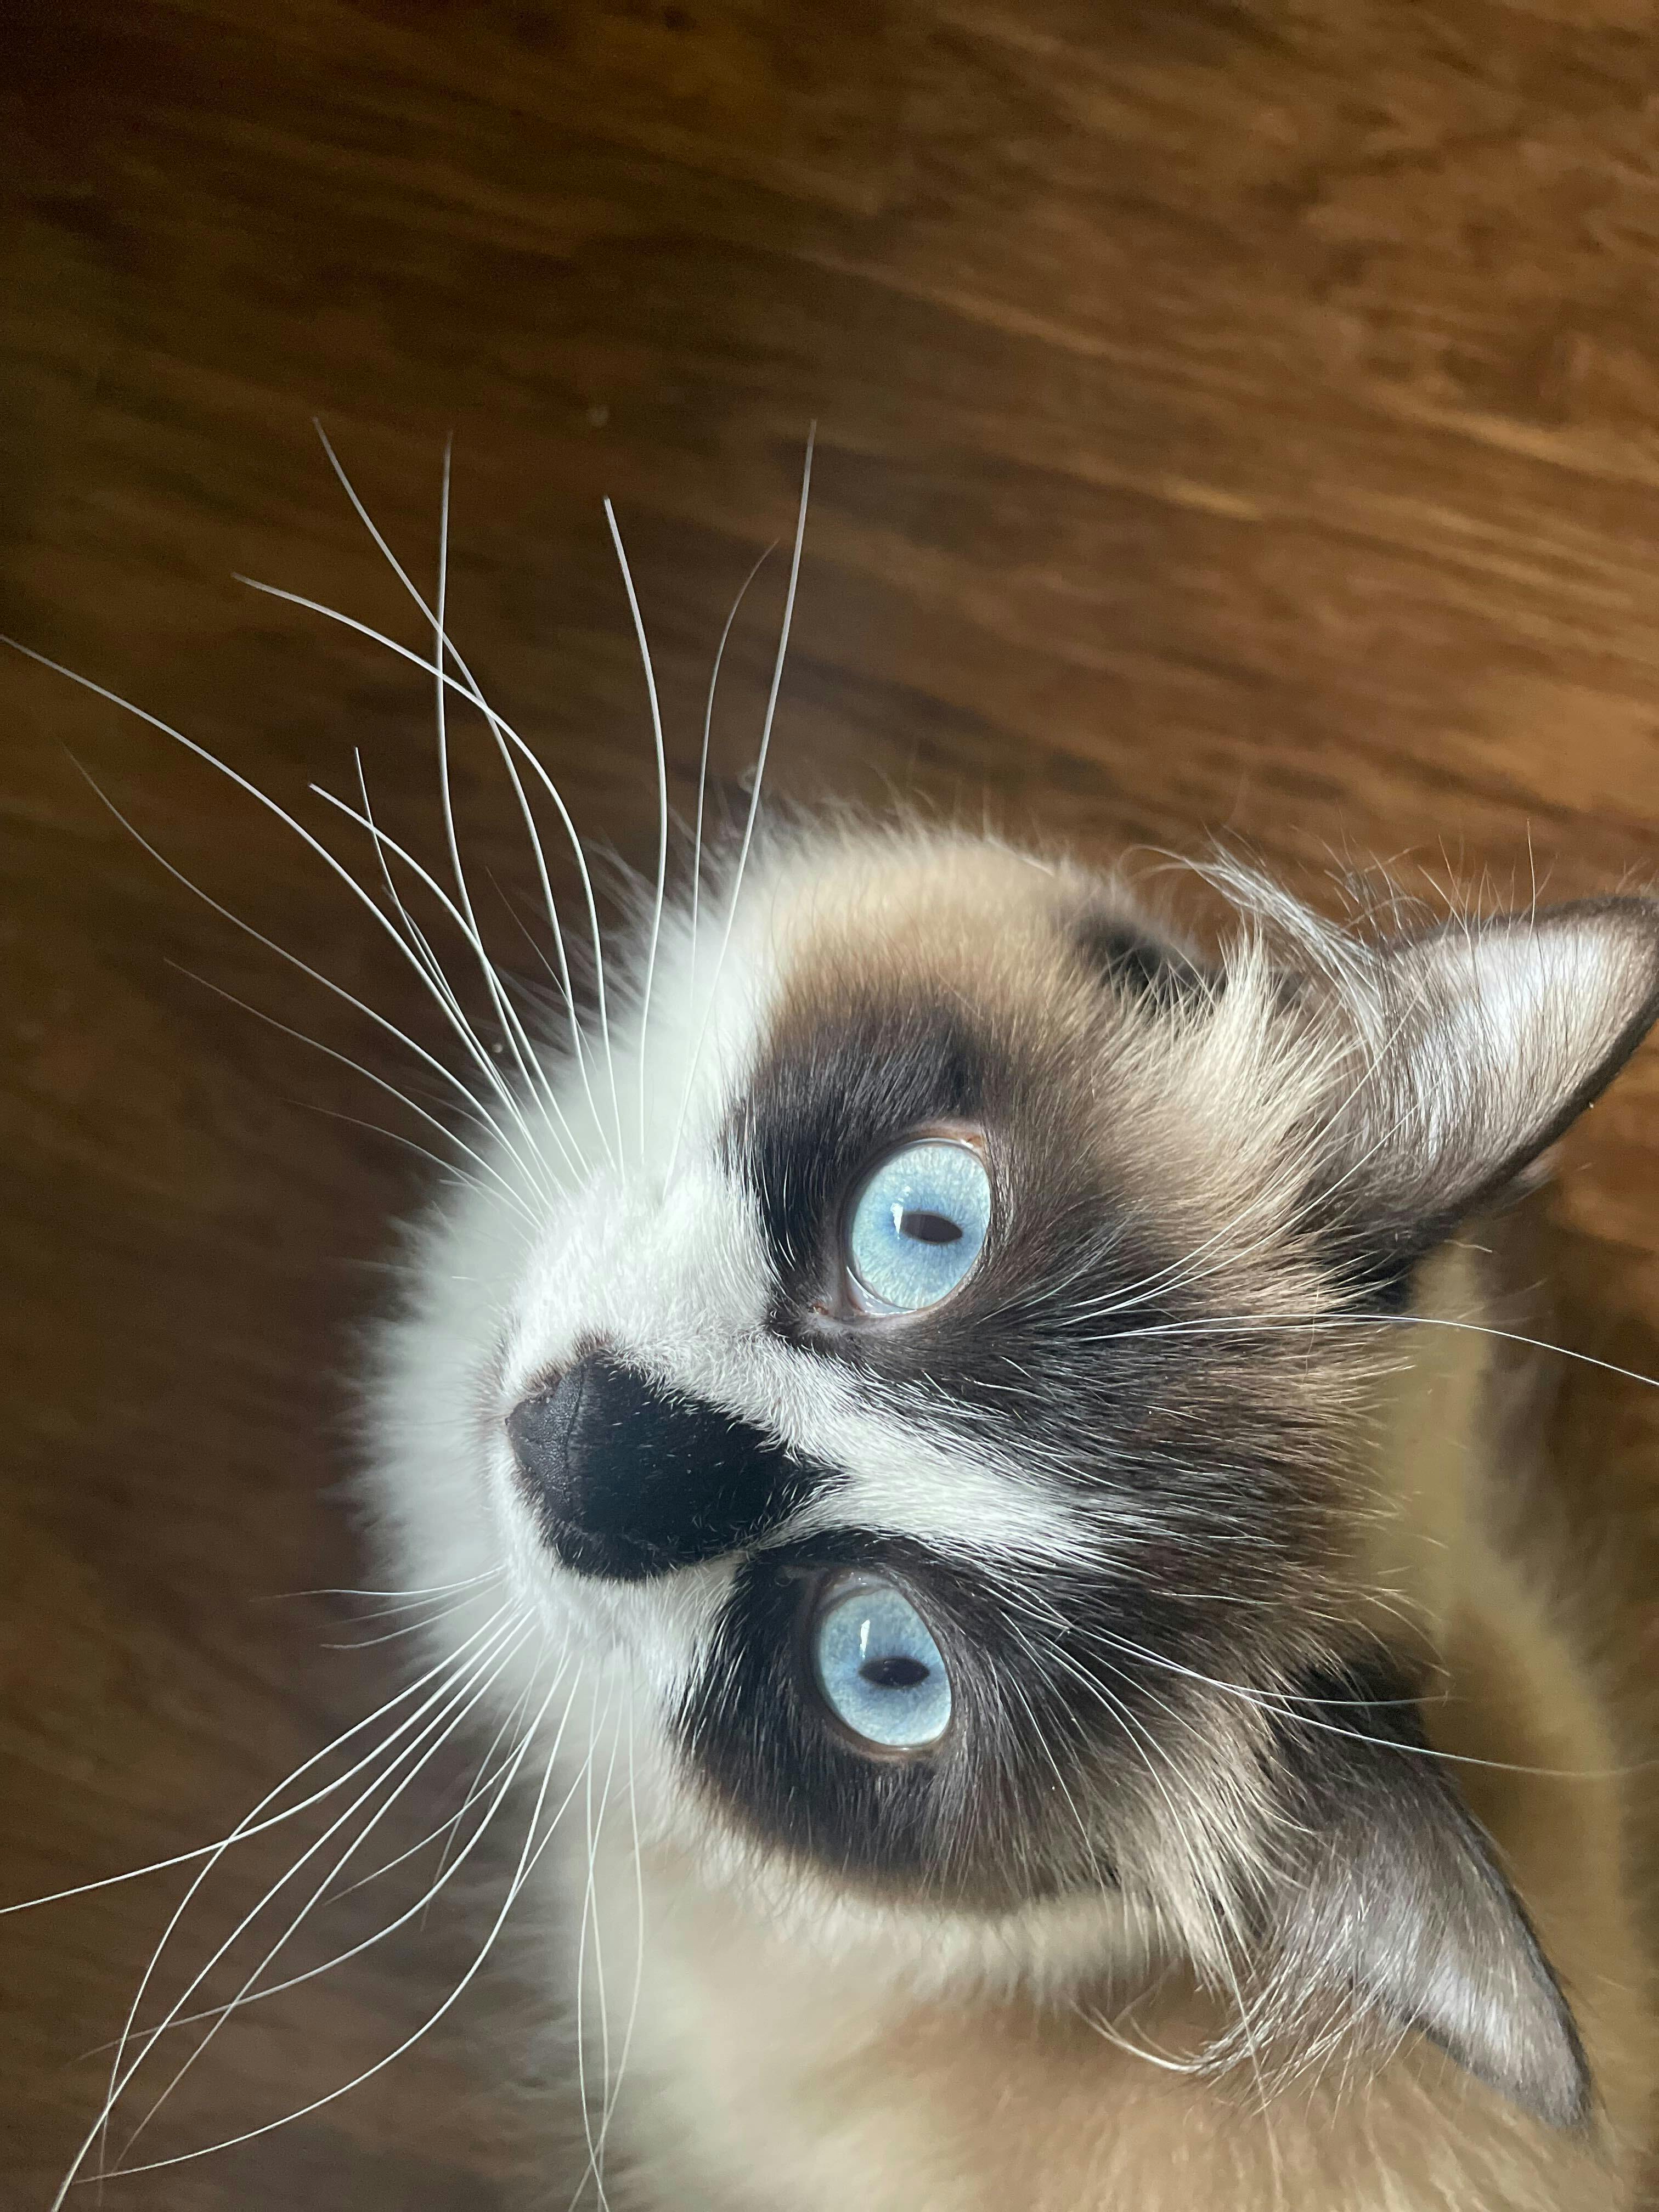 A curious cat with black white and cream fur and piercing blue eyes, looking at the camera with a quizzical expression.